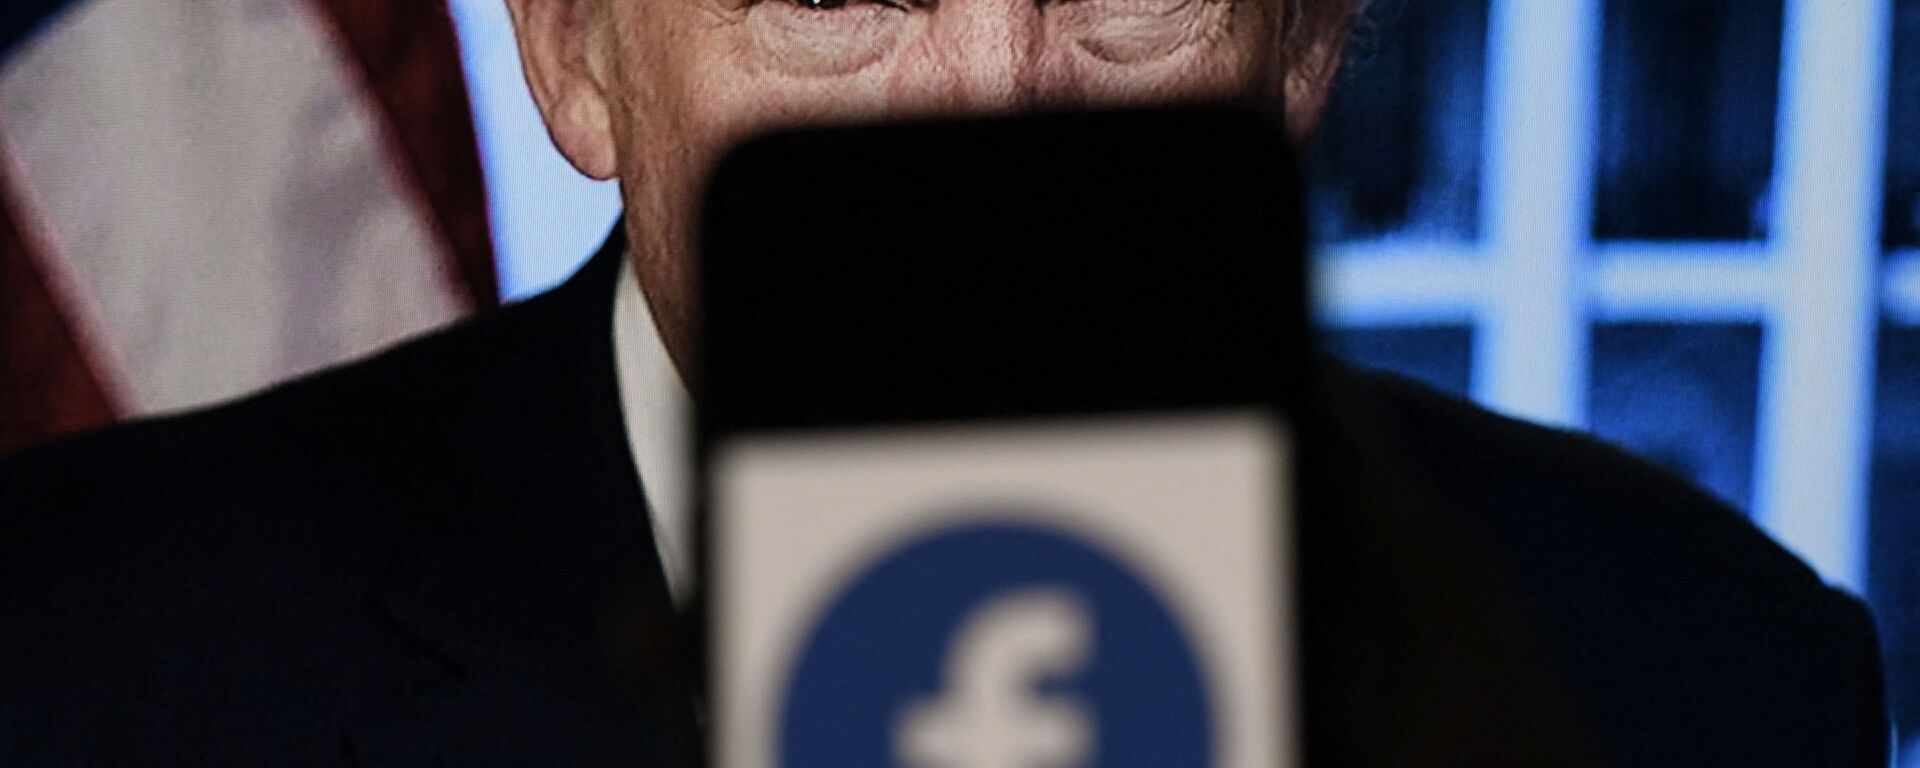 In this photo illustration, a phone screen displays a Facebook logo with the official portrait of former US President Donald Trump on the background, on May 4, 2021, in Arlington, Virginia. - Facebook's independent oversight board was set for a momentous decision on the platform's ban of former US president Donald Trump, as debate swirls on the role of social media in curbing hateful and abusive speech while controlling political discourse. - Sputnik International, 1920, 18.01.2023